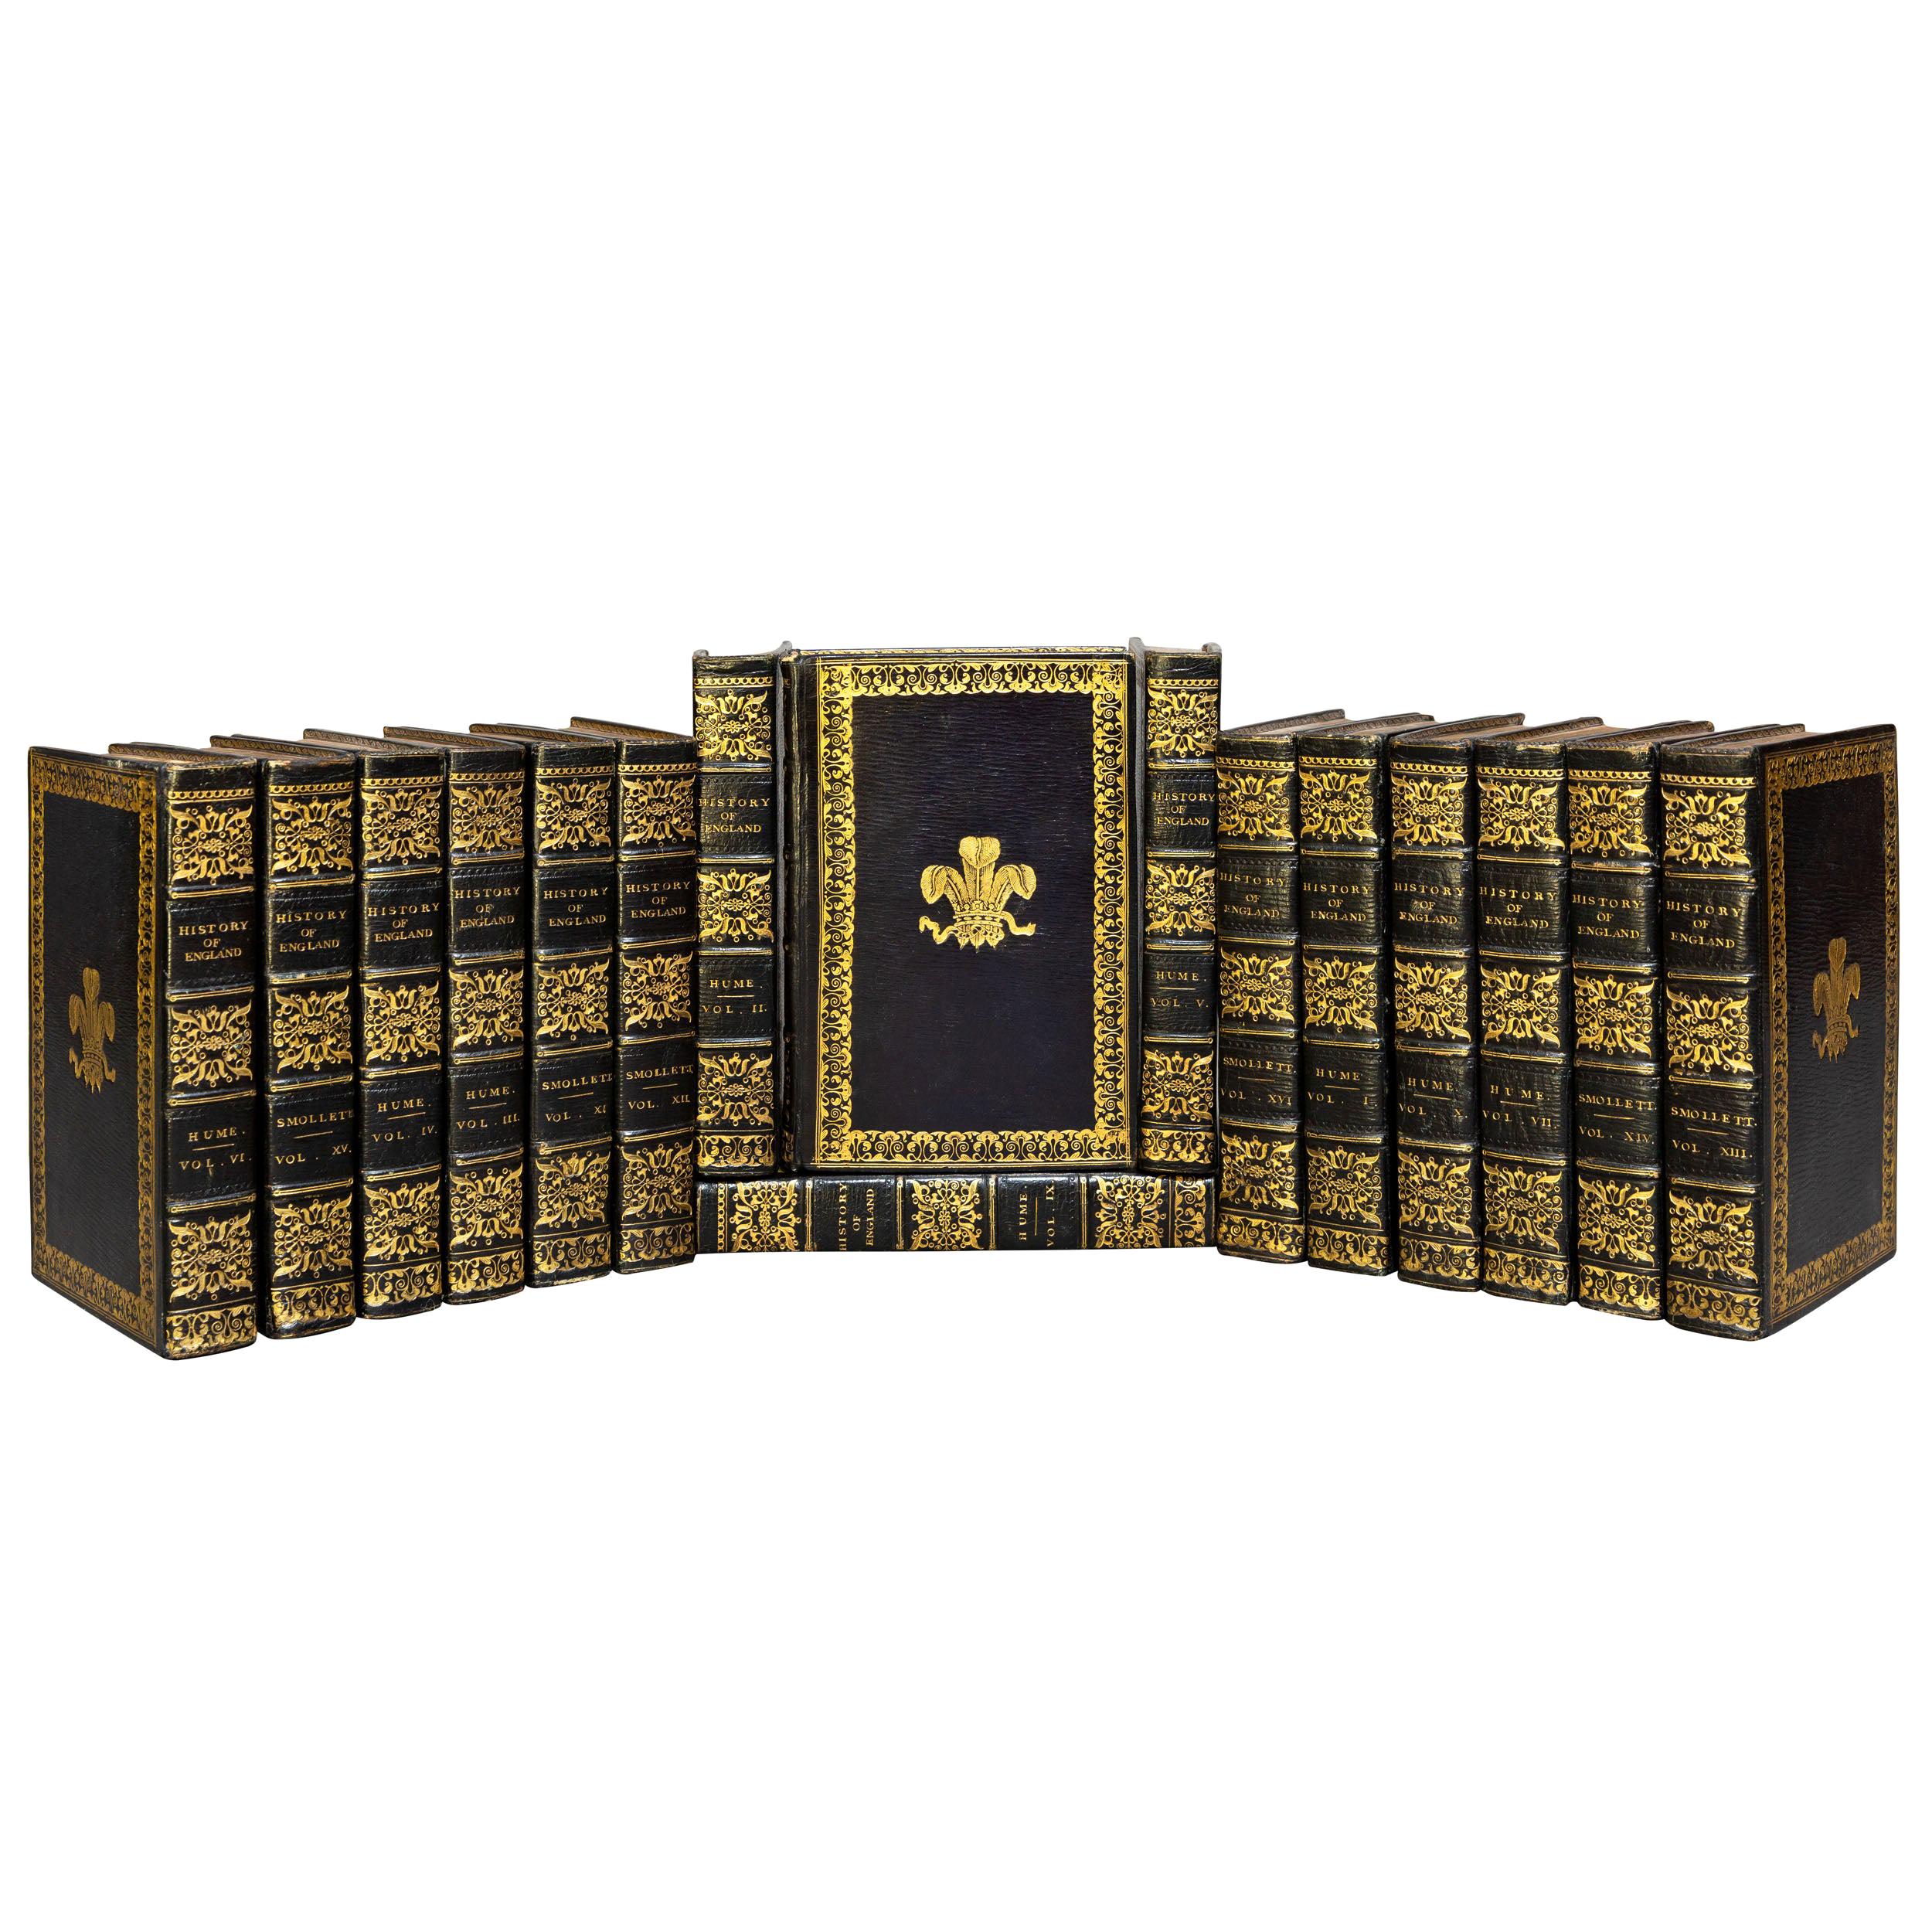 'Book Sets' 16 Volumes, David Hume & T. Smollett, The History Of England